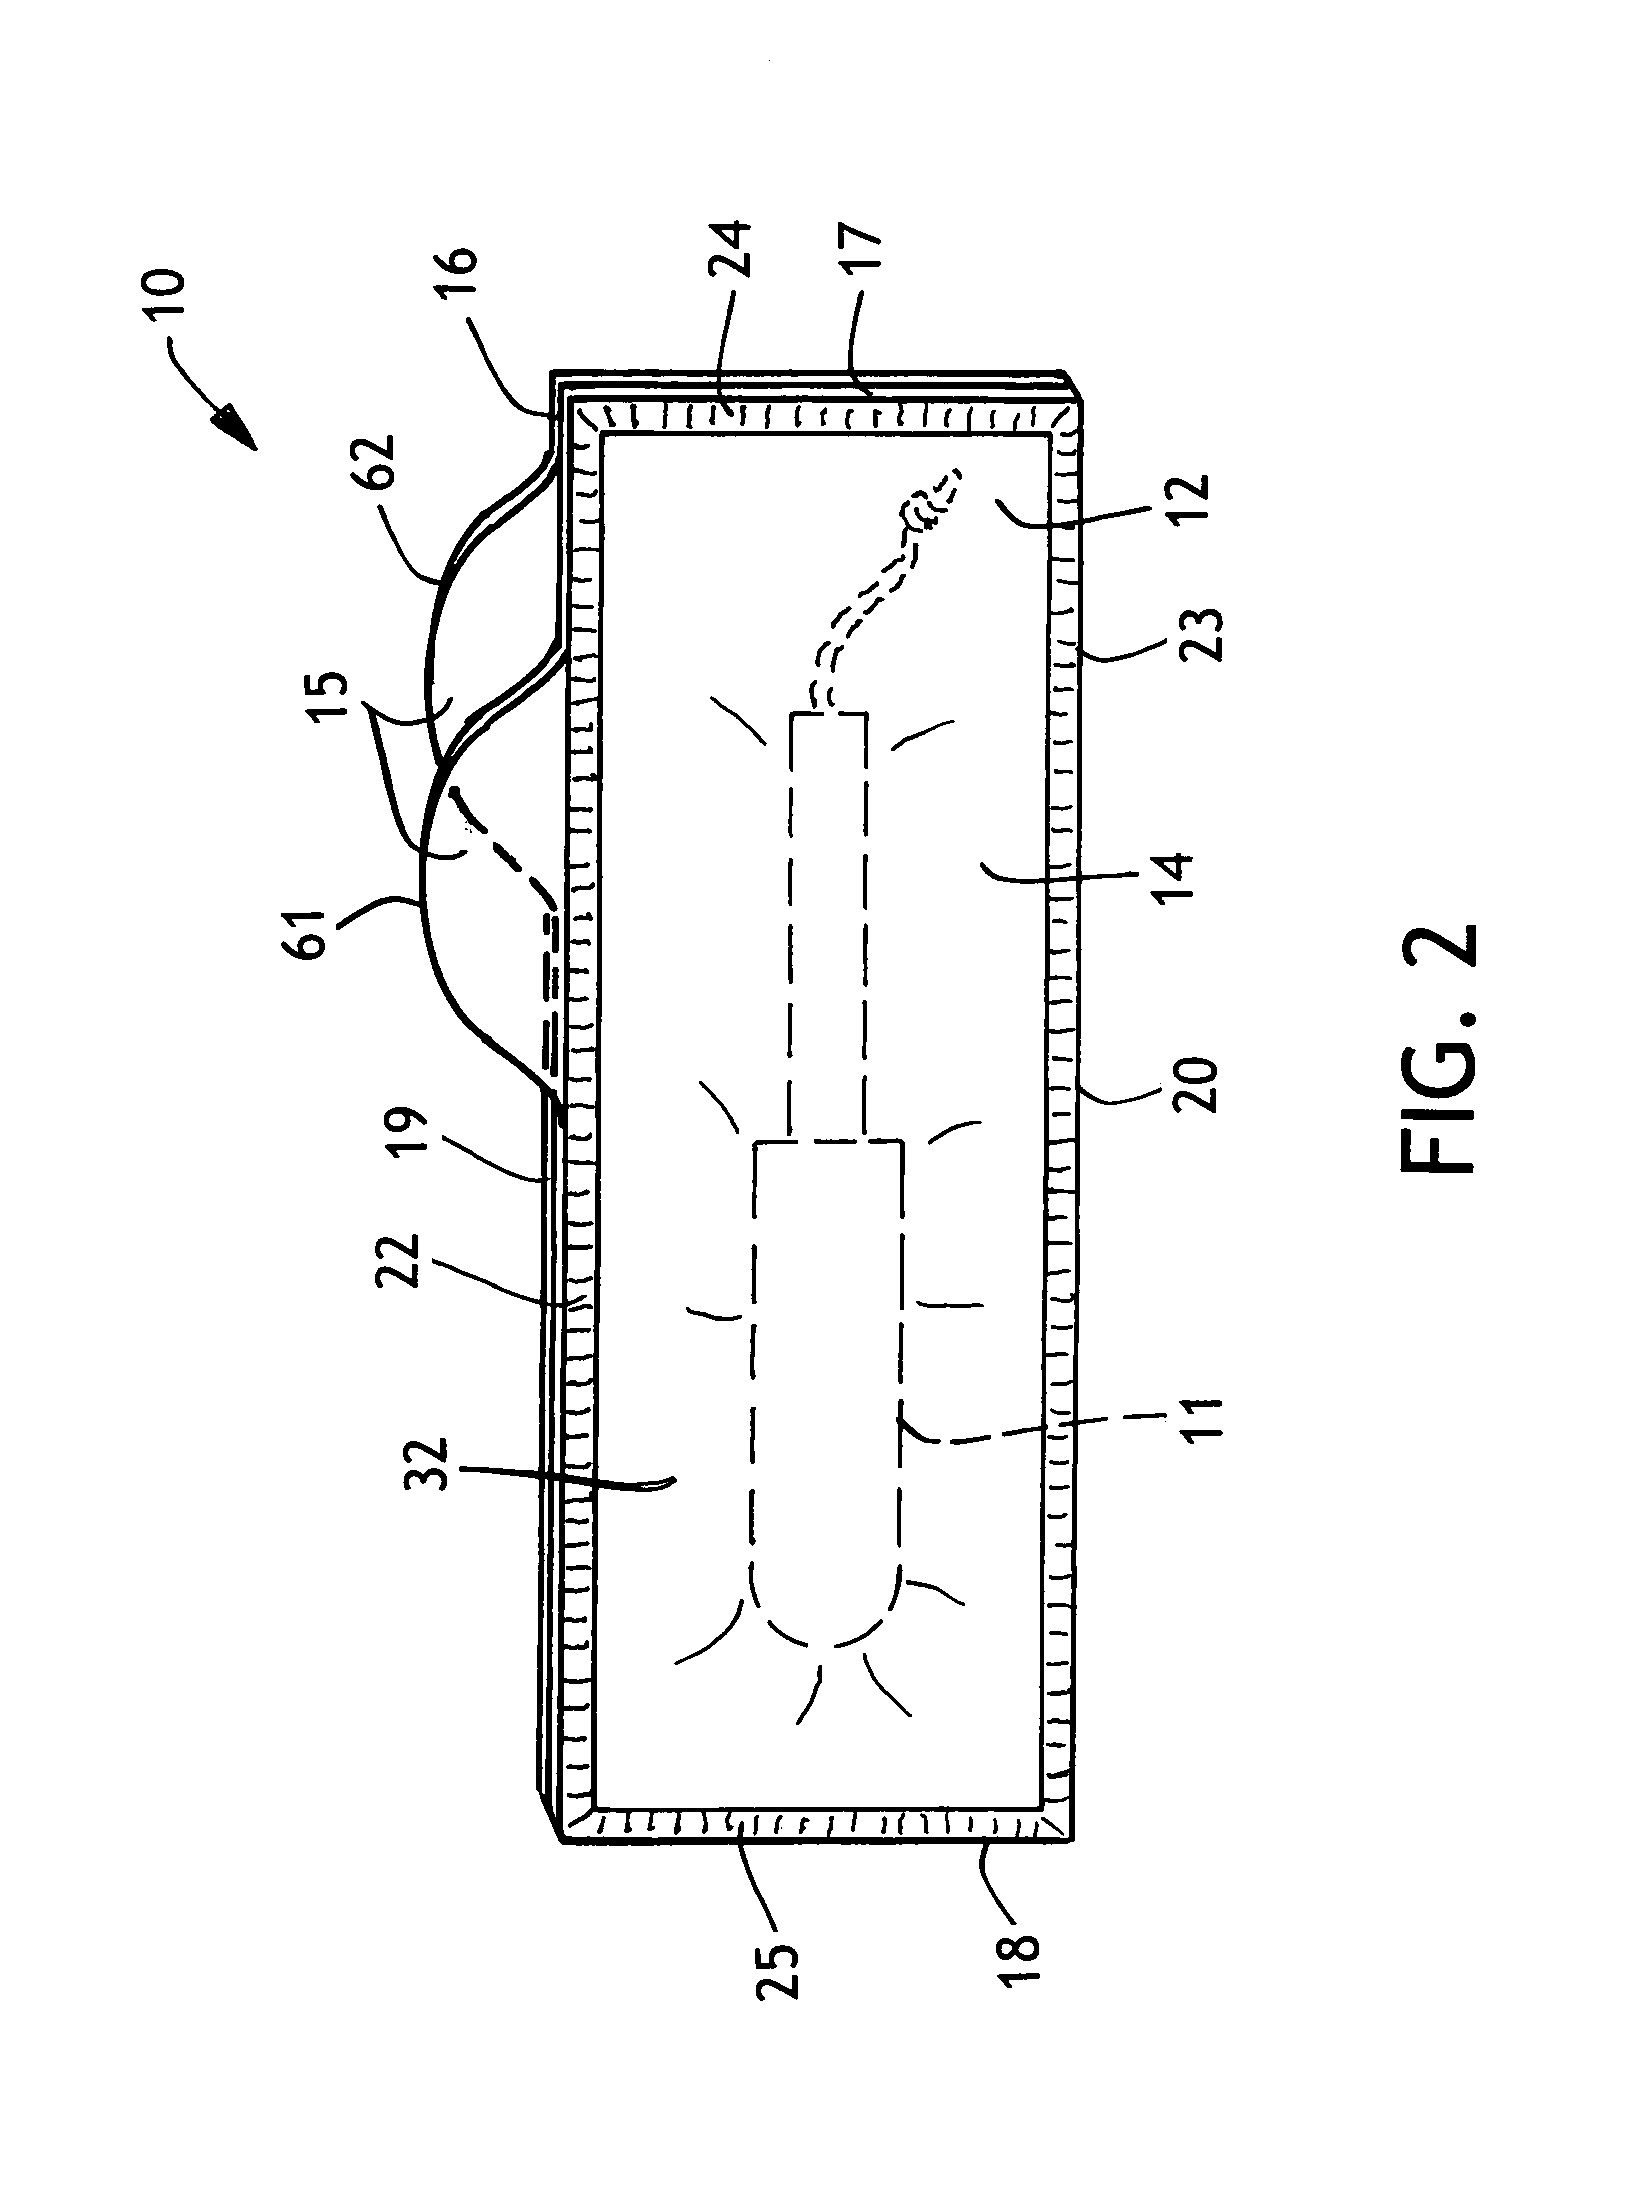 Packaged tampon and applicator assembly